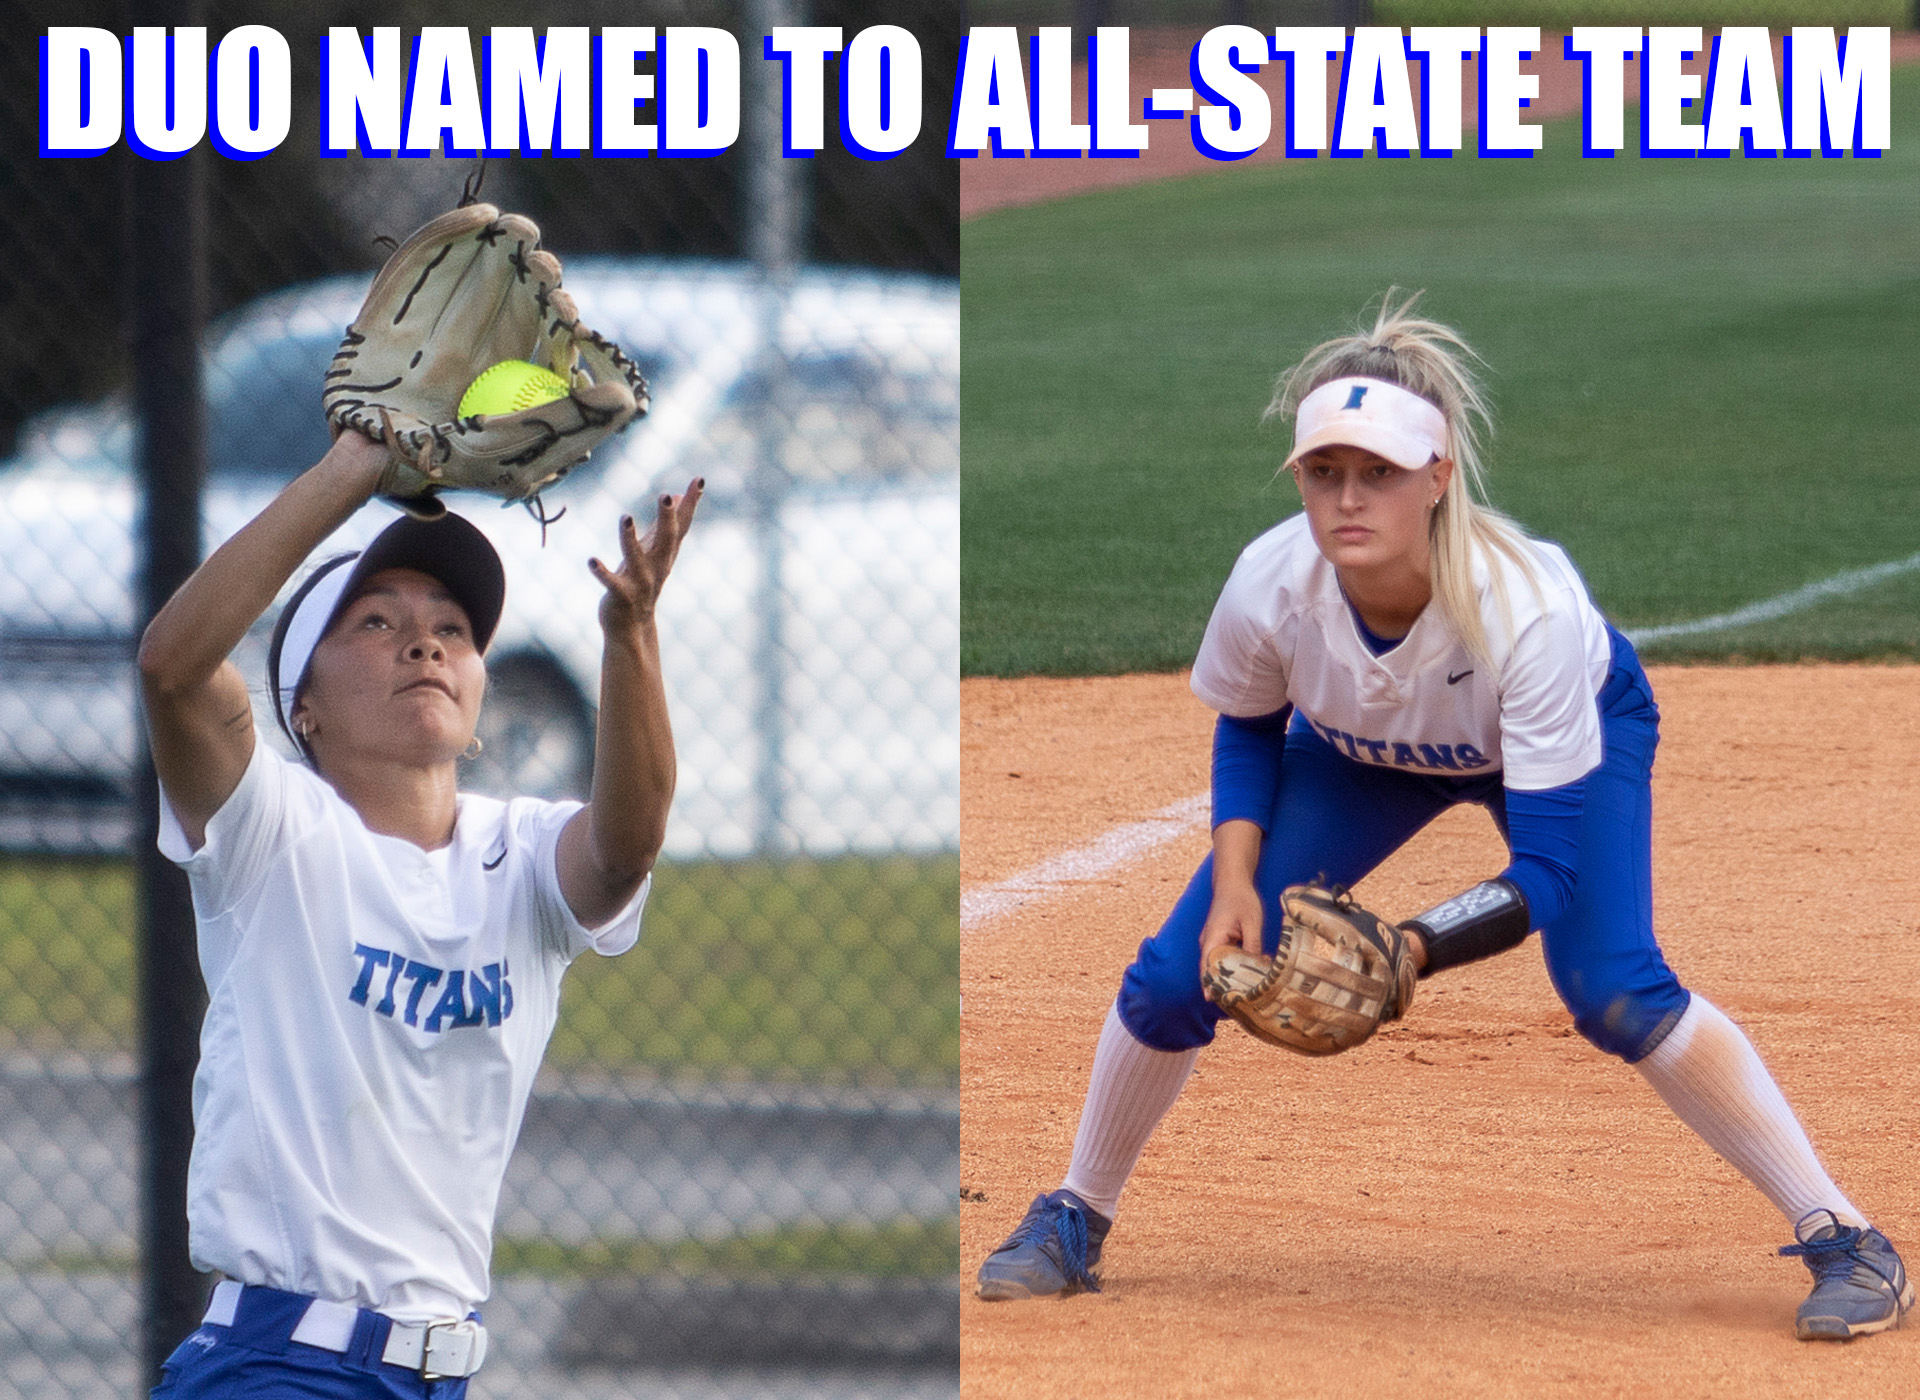 Domon, Theisen named to FCSAA All-State teams